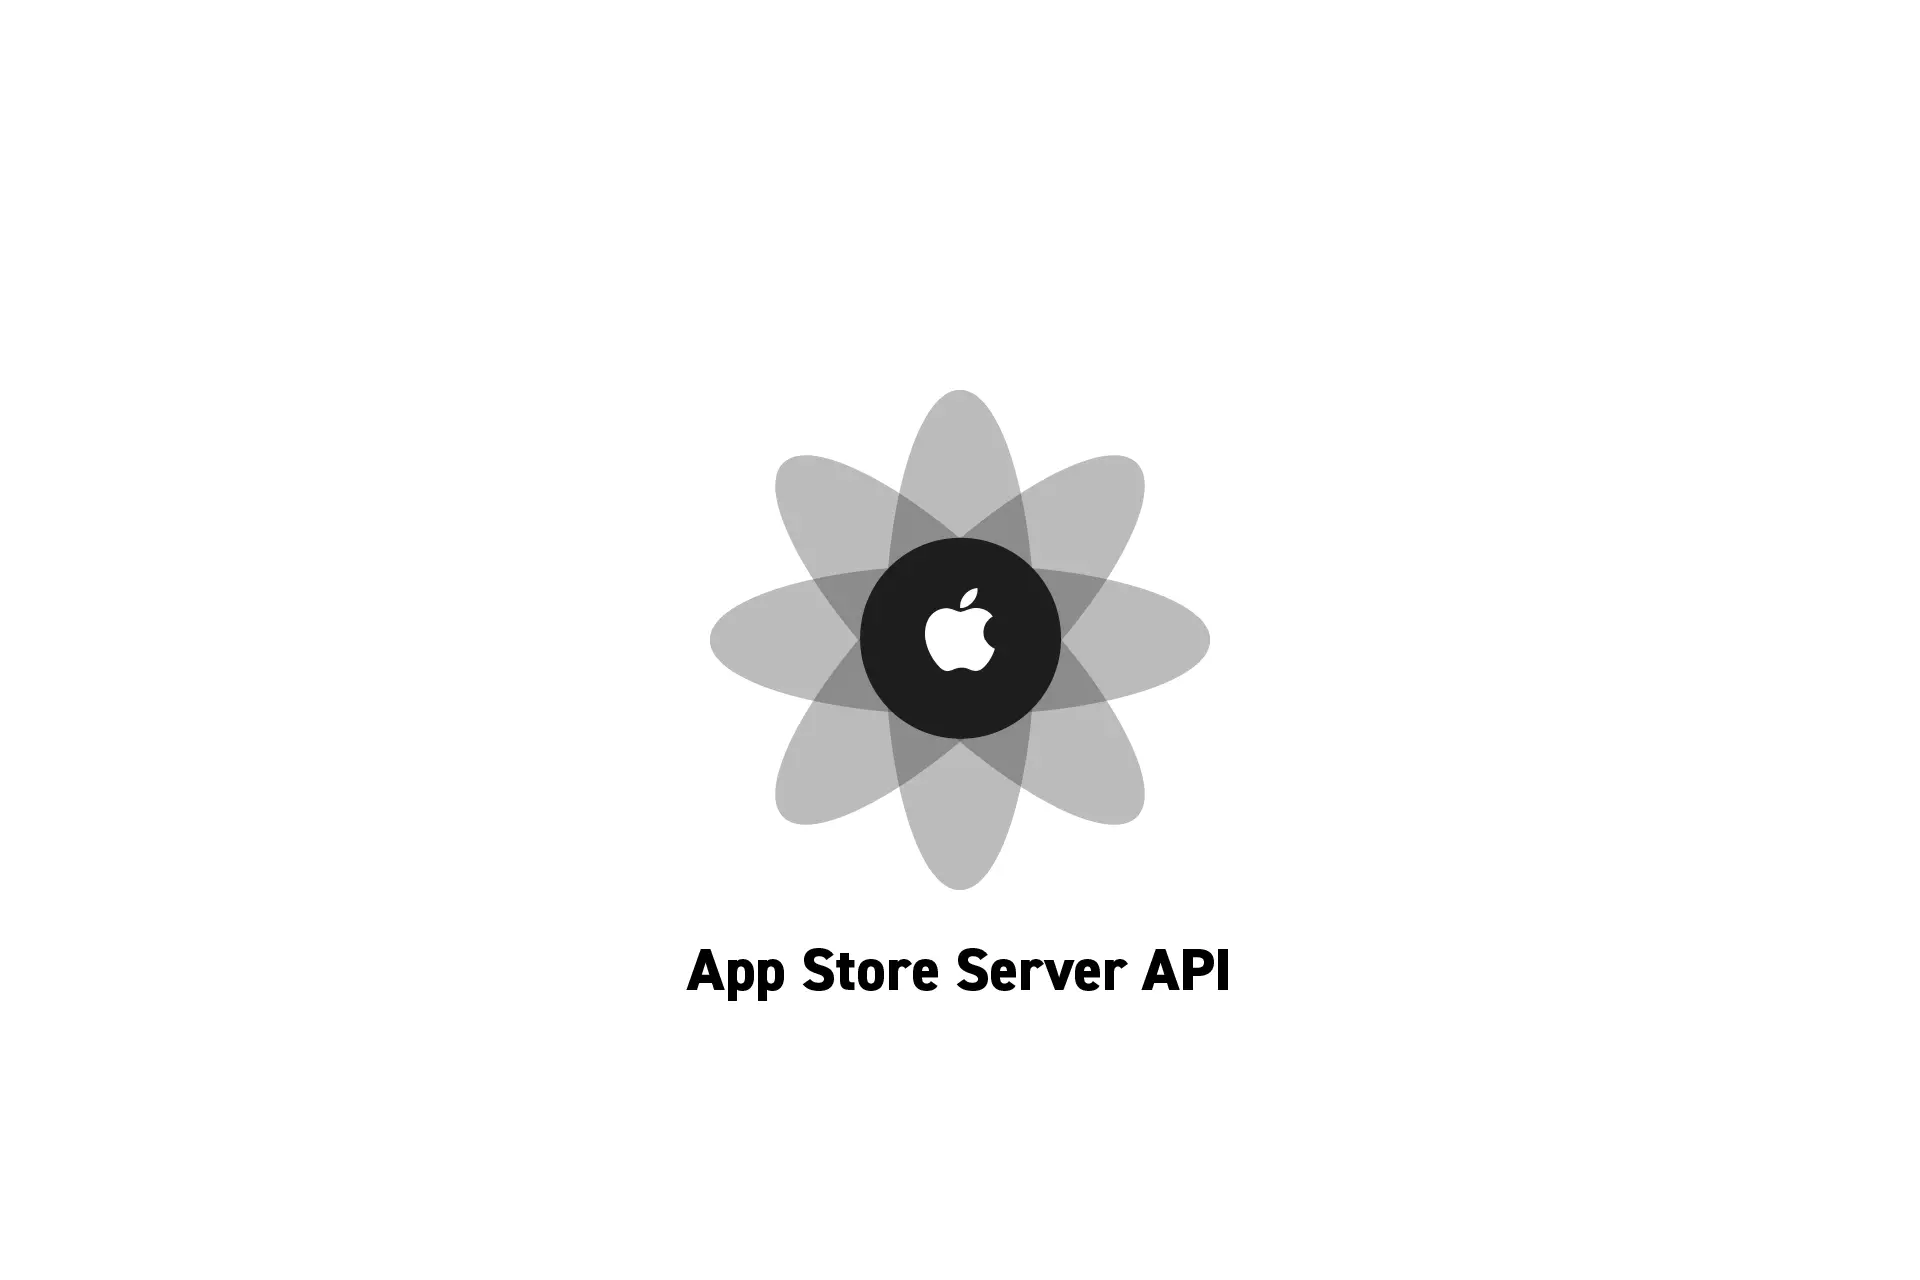 A flower that represents Apple with the text "App Store Server API" beneath it.